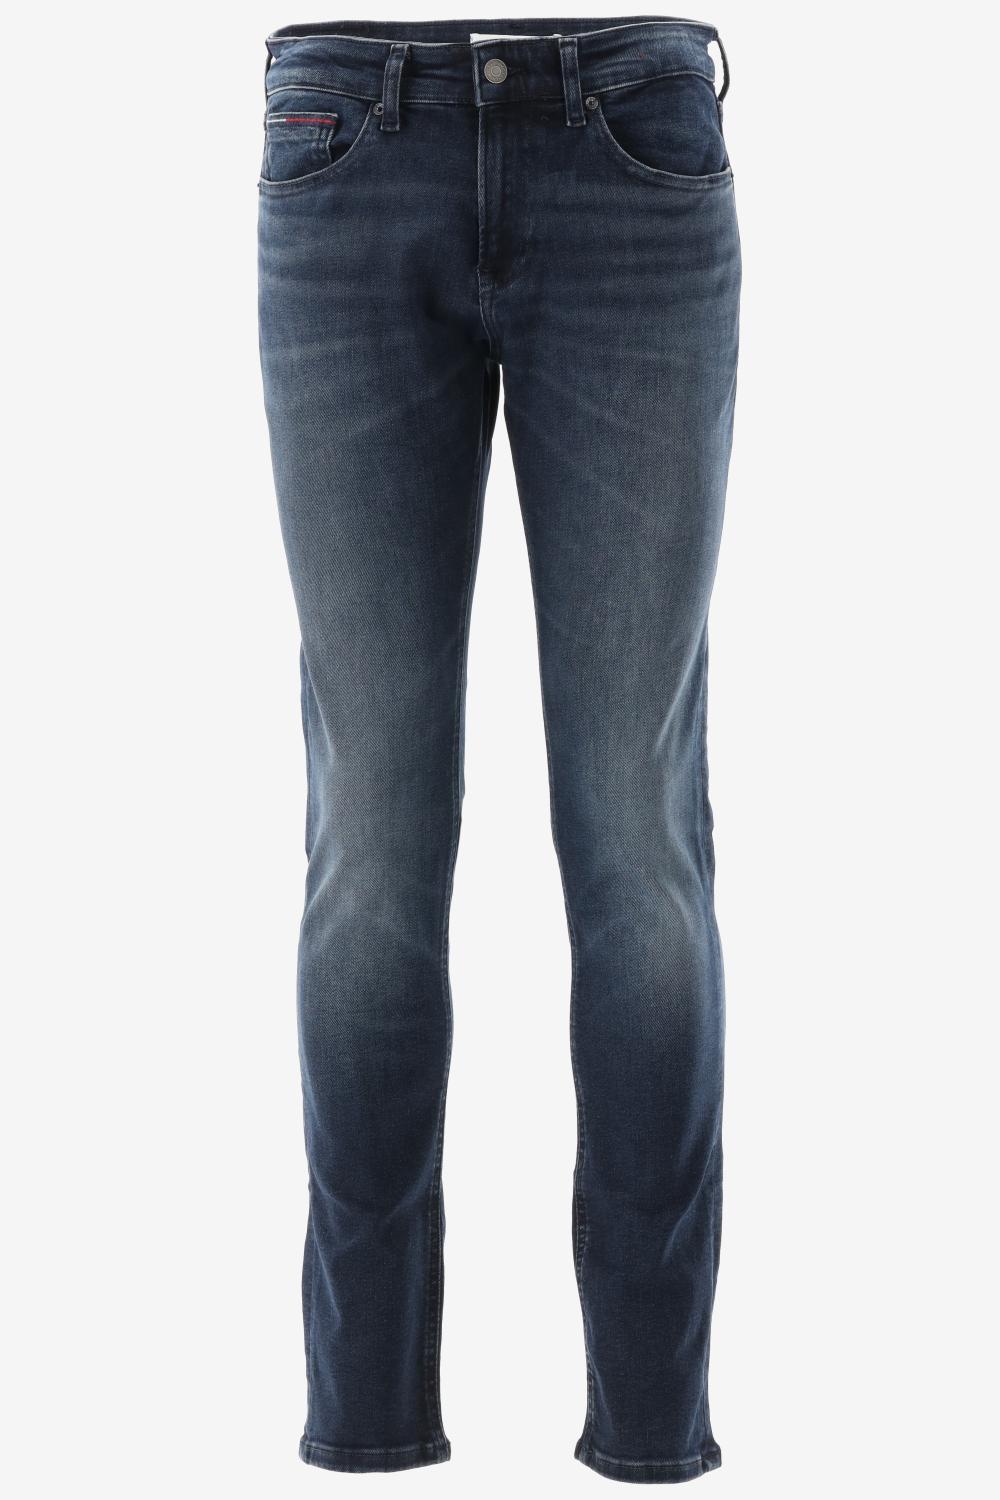 Tommy Jeans Jeans - Slim Fit - Blauw - 33-32